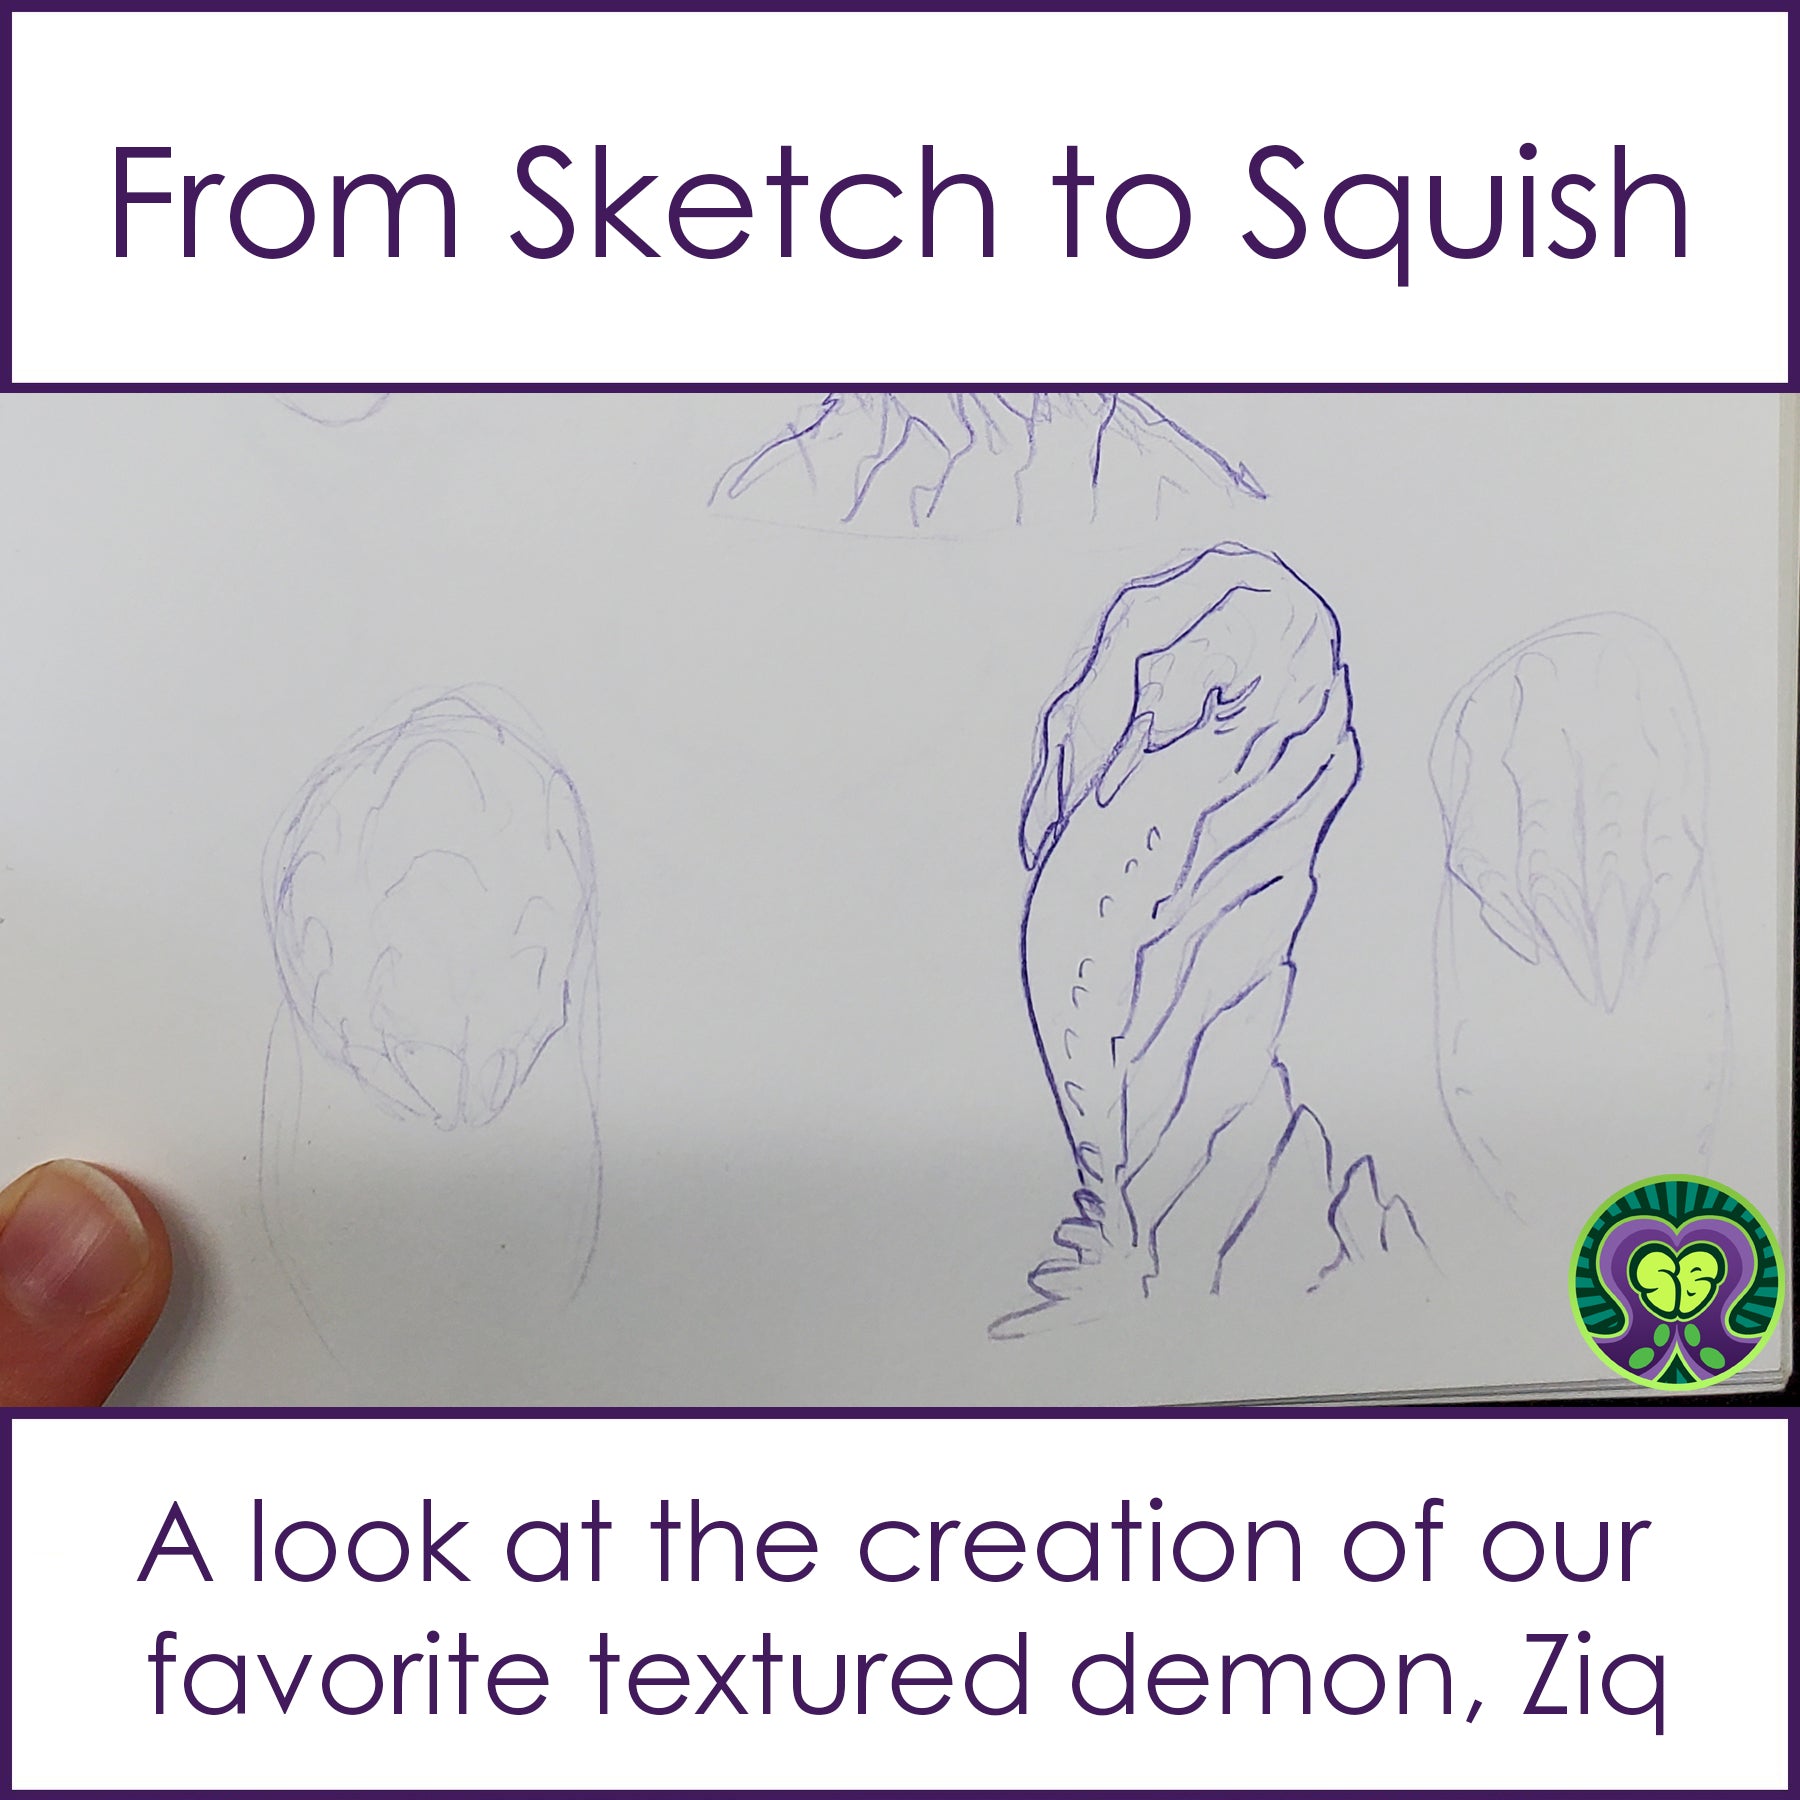 From Sketch to Squish: Creating Ziq